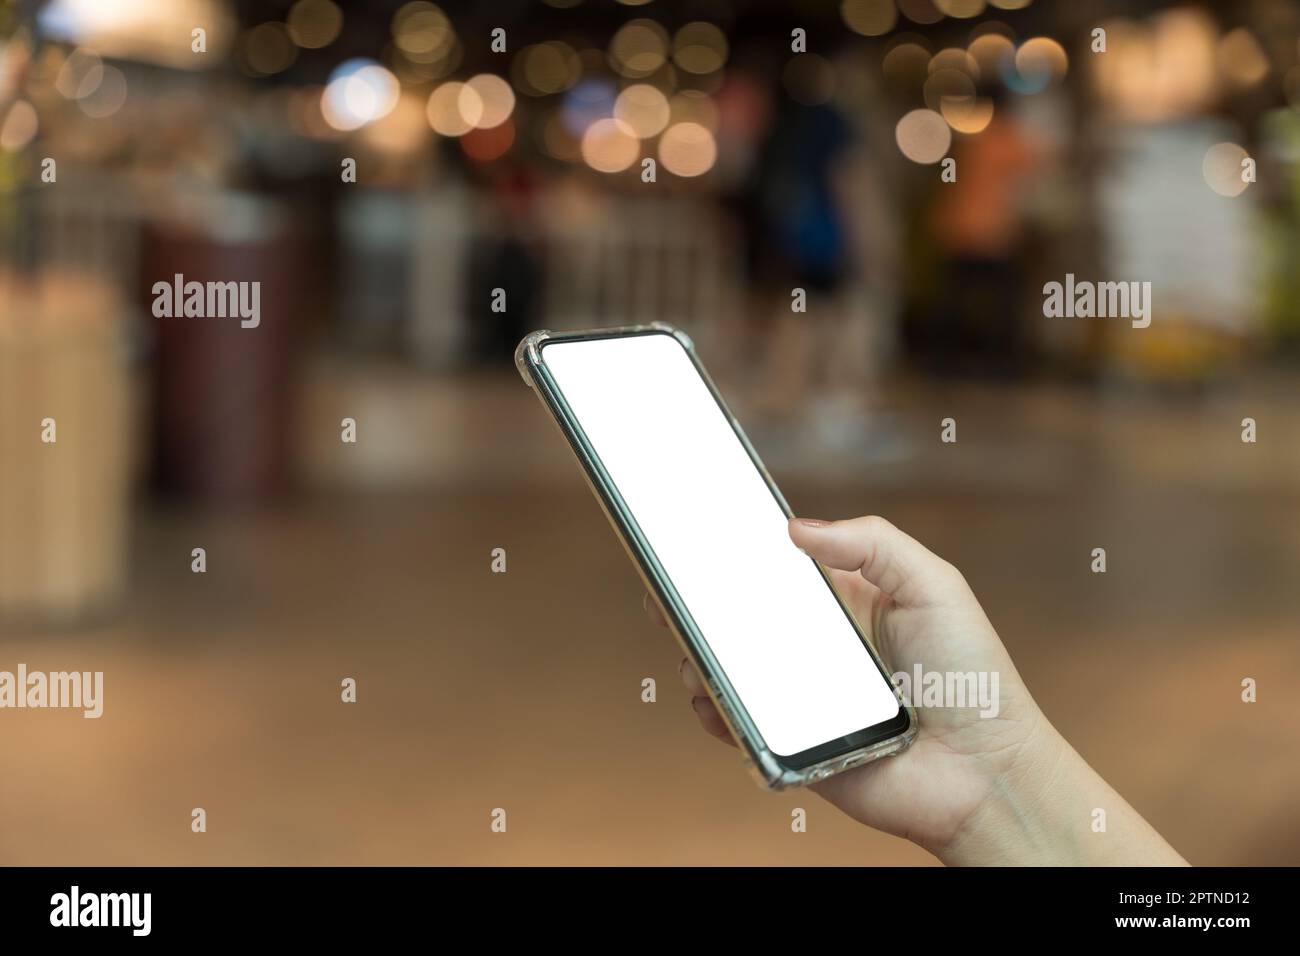 Hands Holding Smartphone Displaying Logo of Vanity Fair Editorial Stock  Photo - Image of application, internet: 186520853